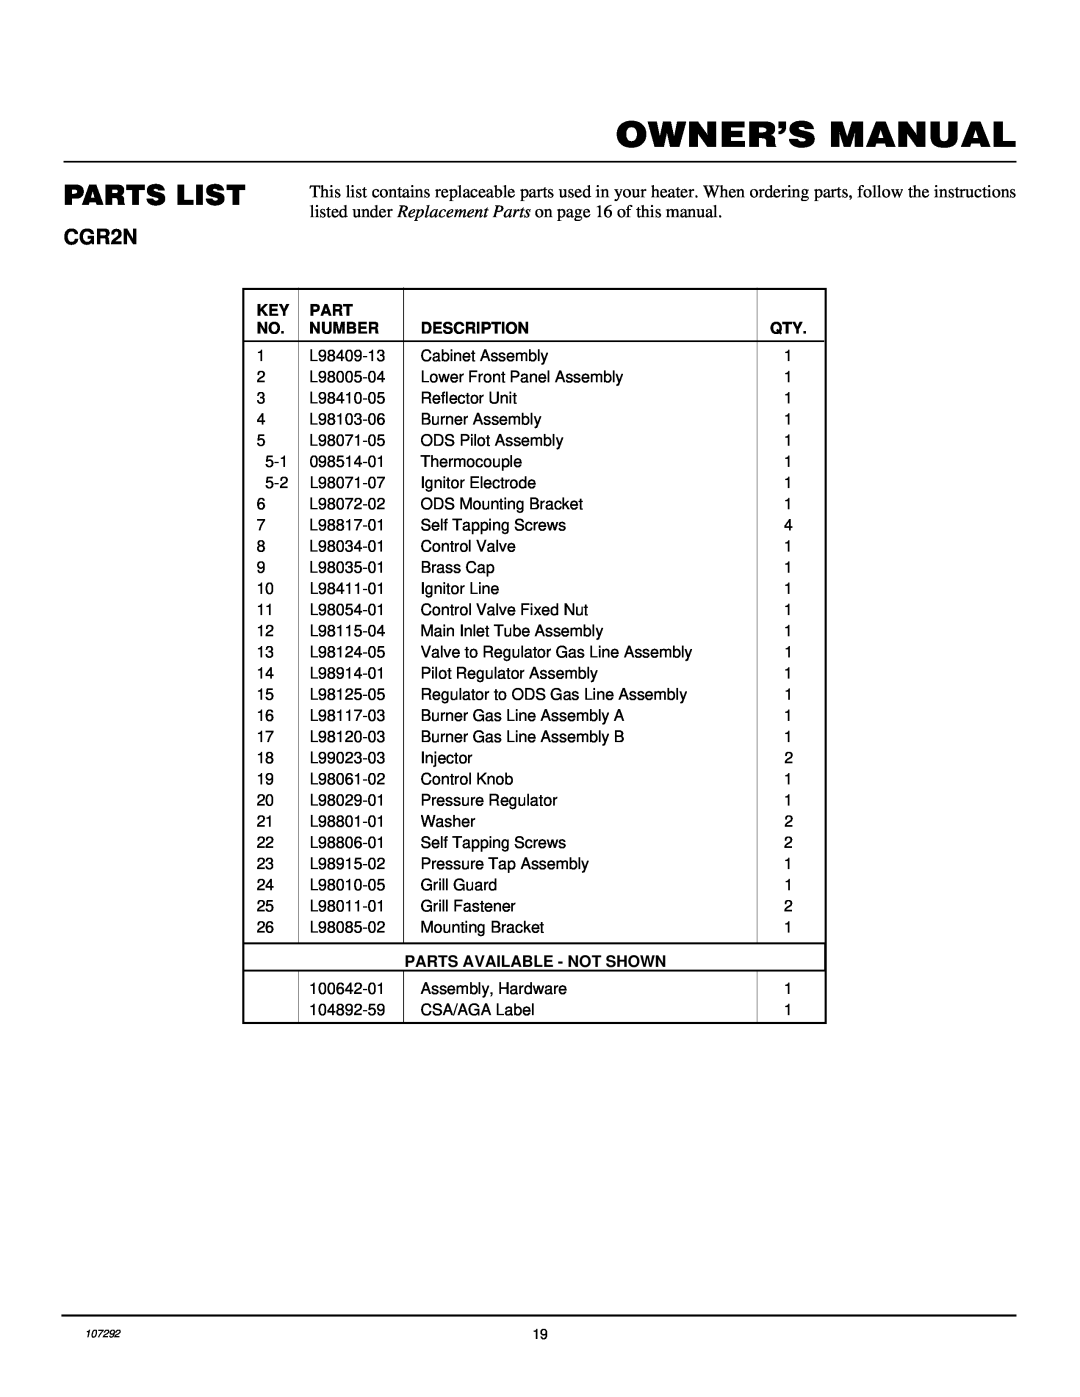 Desa CGR2N installation manual Parts List, Owner’S Manual, Number, Description, Parts Available - Not Shown 